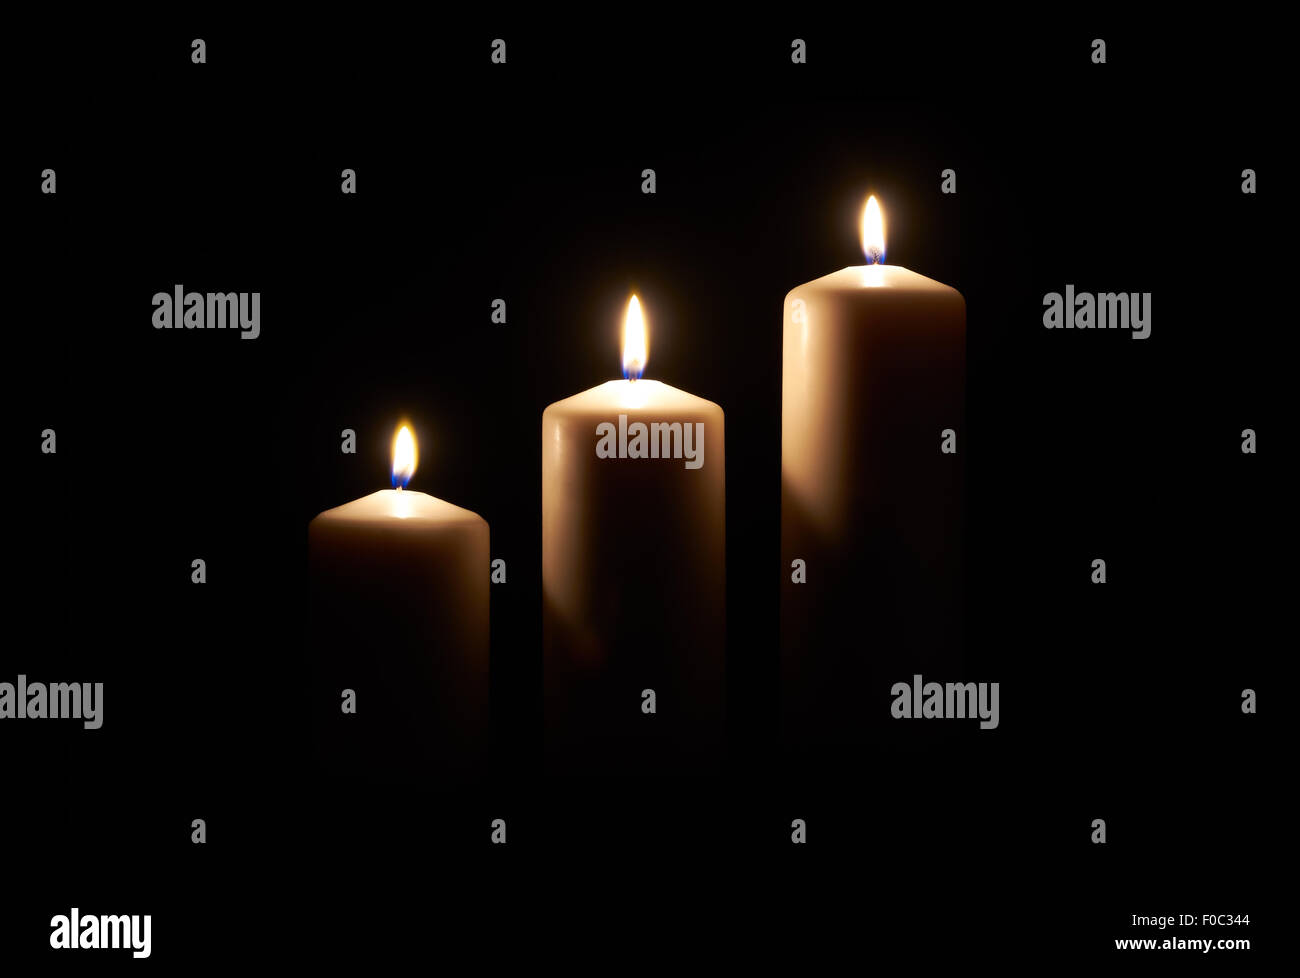 Lit white candles on a dark wooden floor with black background. Stock Photo